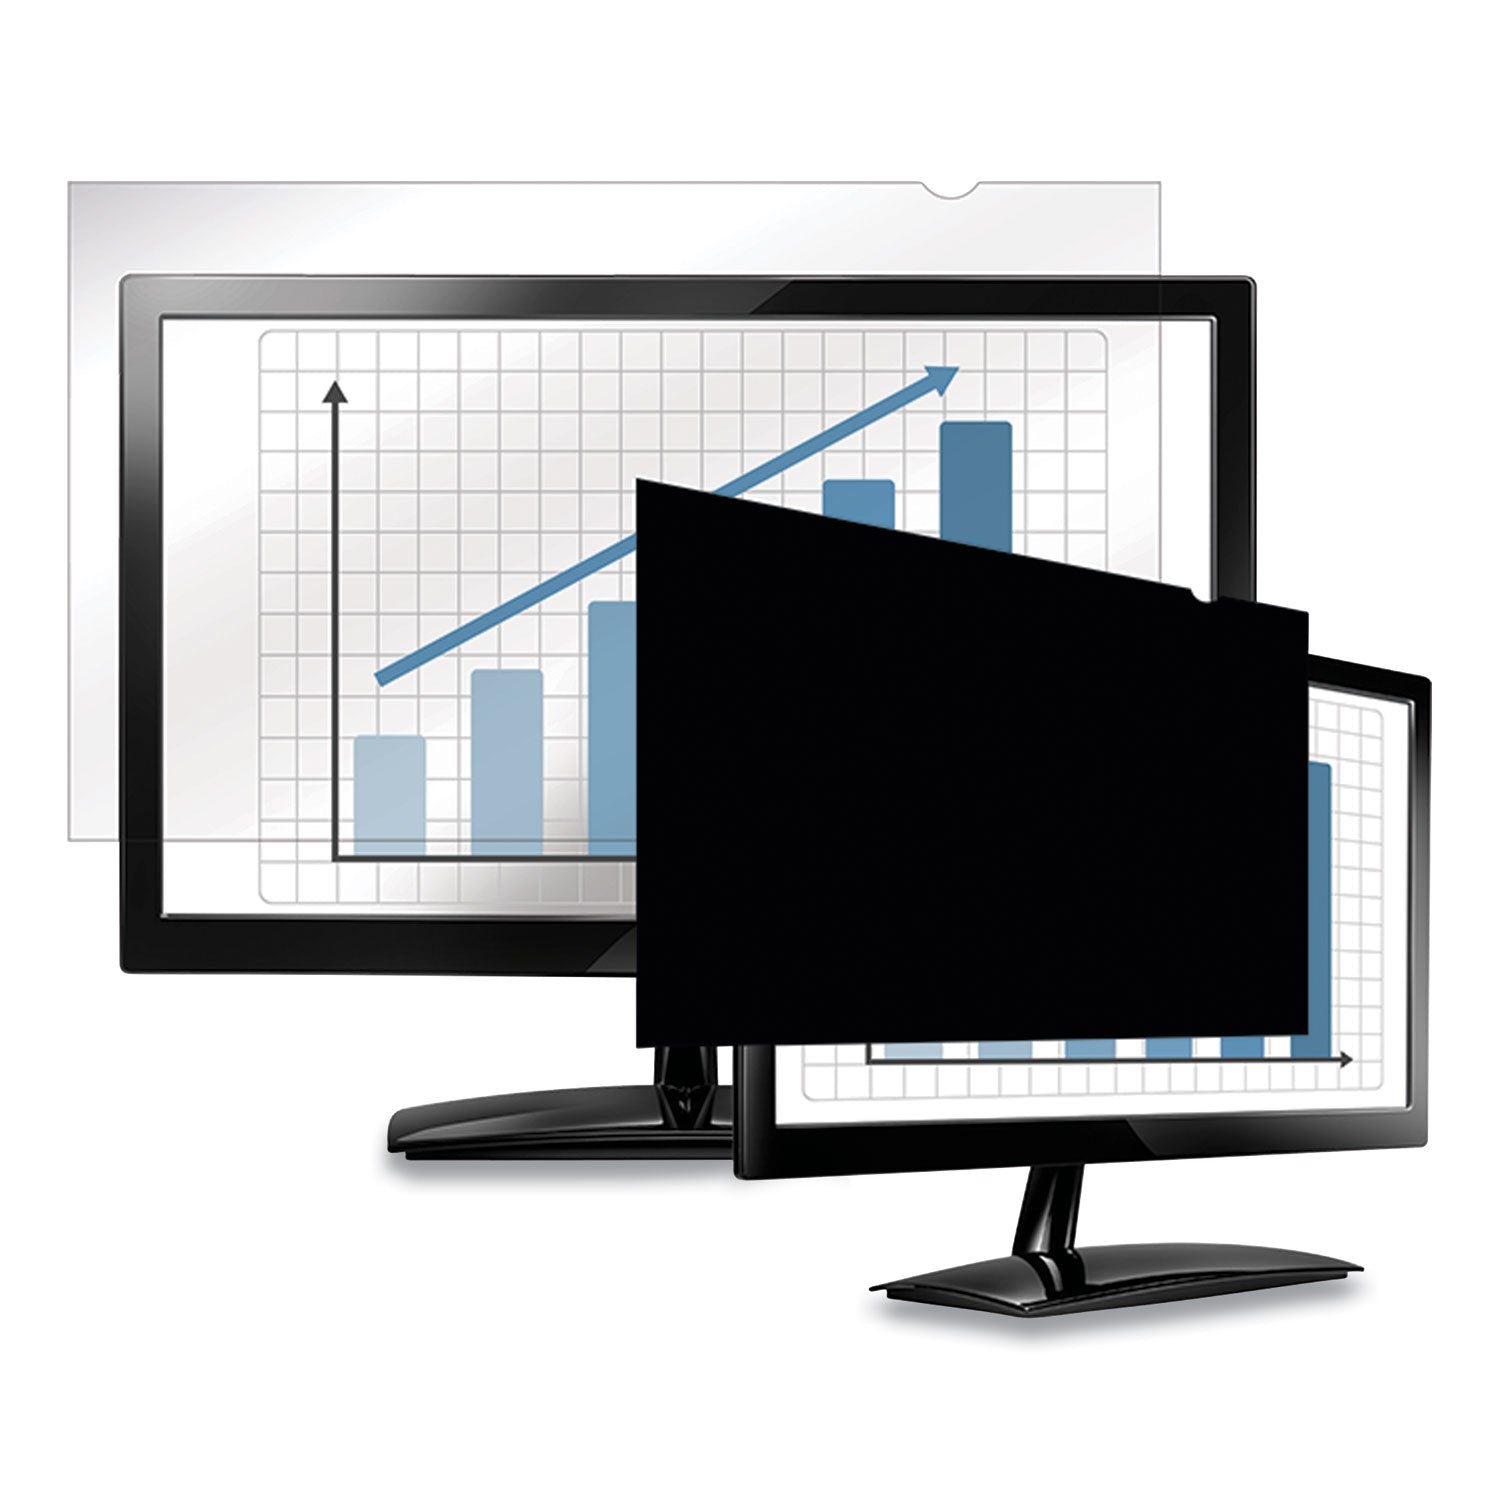 PrivaScreen Blackout Privacy Filter for 21.5" Widescreen Flat Panel Monitor, 16:9 Aspect Ratio - 